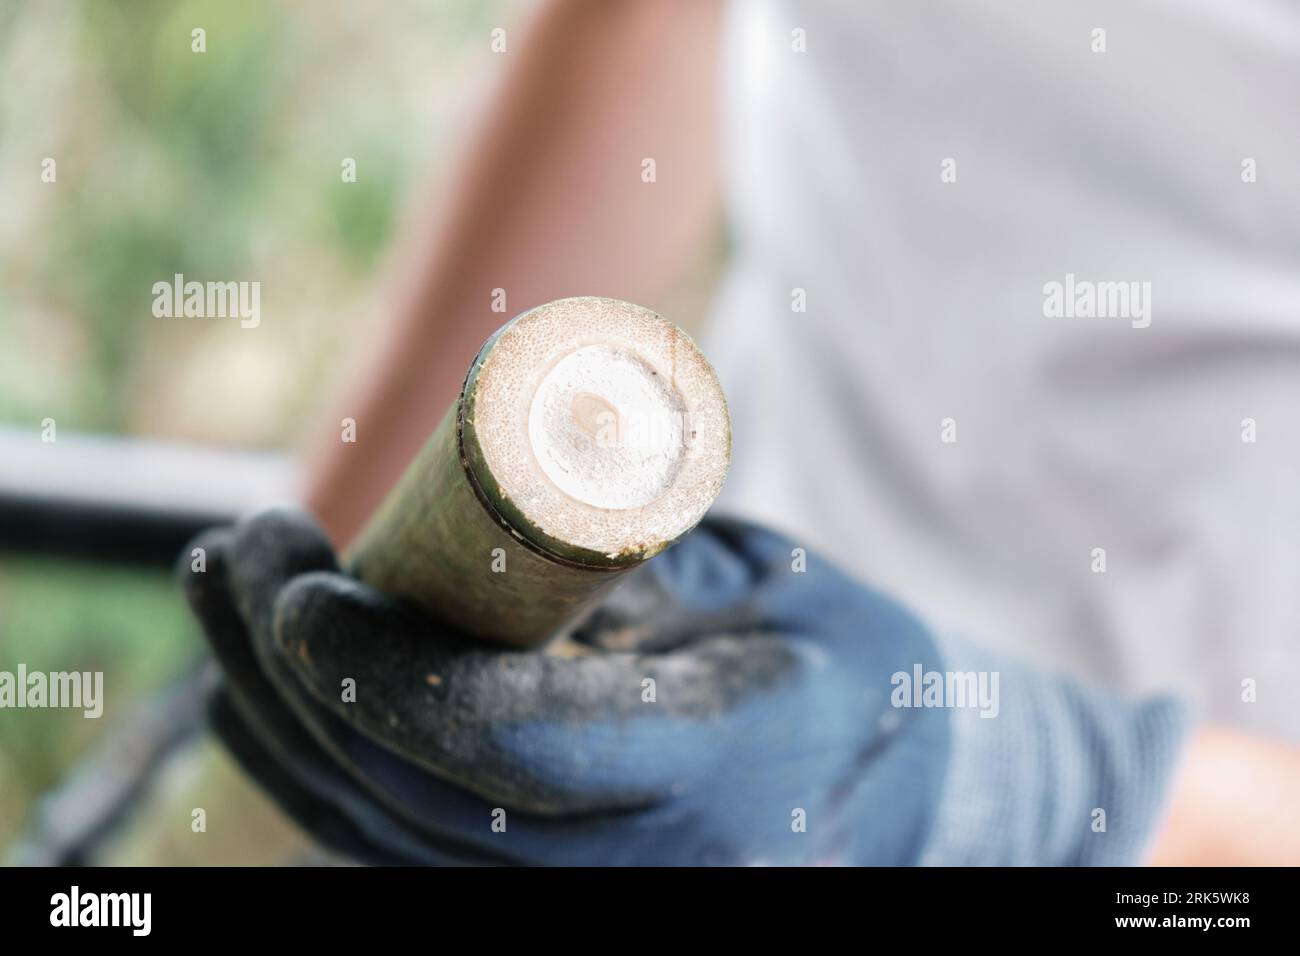 Gloved hands of an unrecognizable man holding a bamboo stick in foreground with bokeh background. Stock Photo